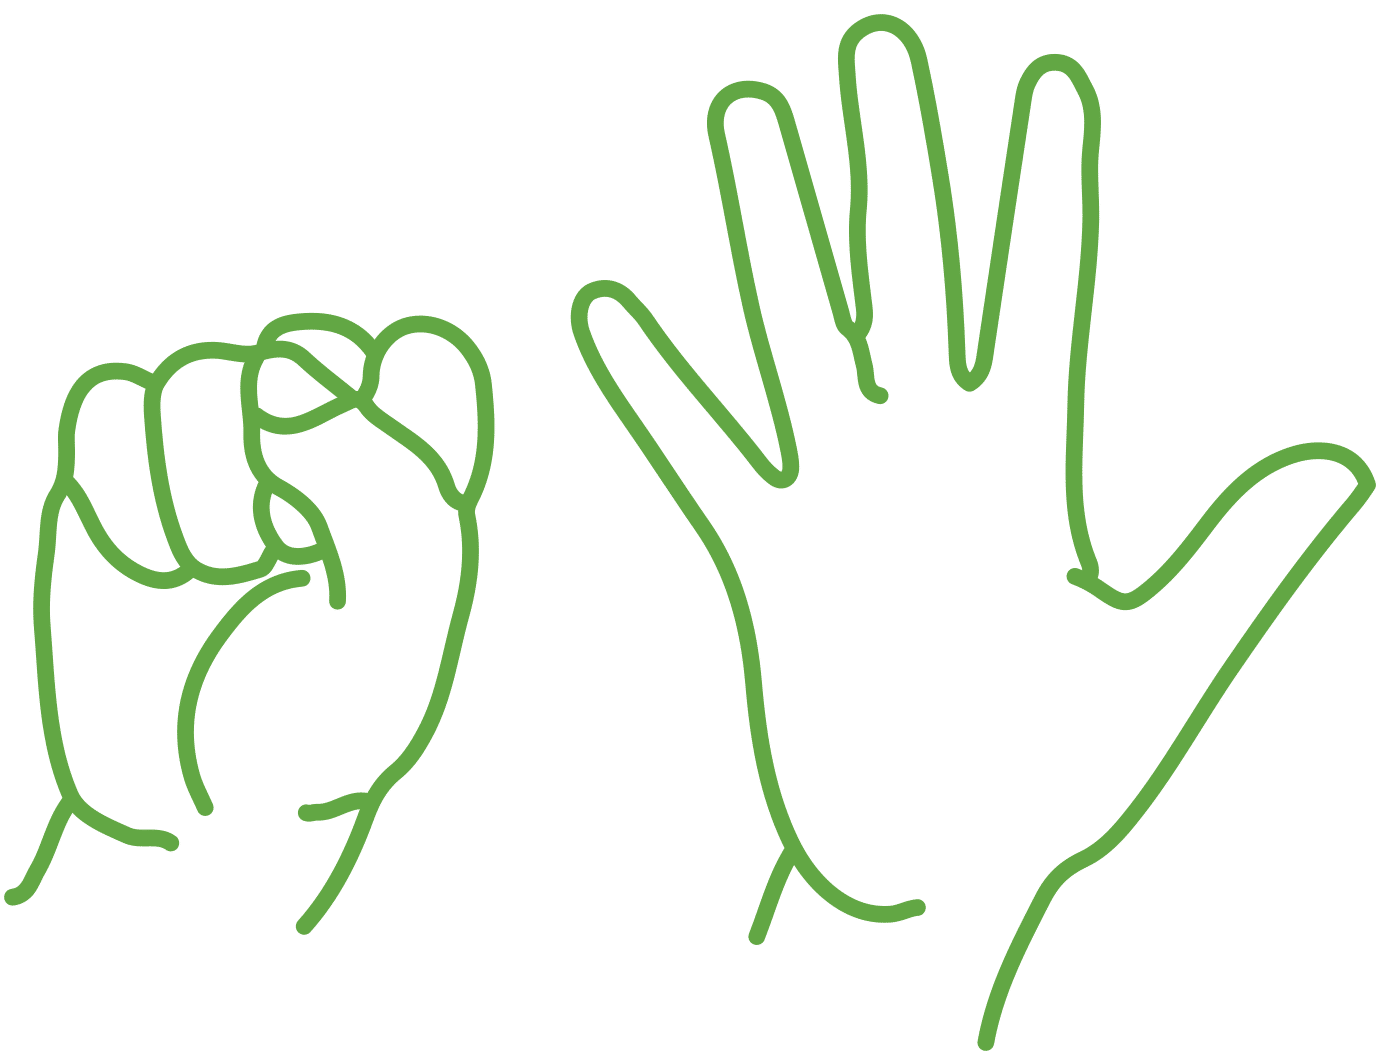 open and close fist - hand exercises for arthritis